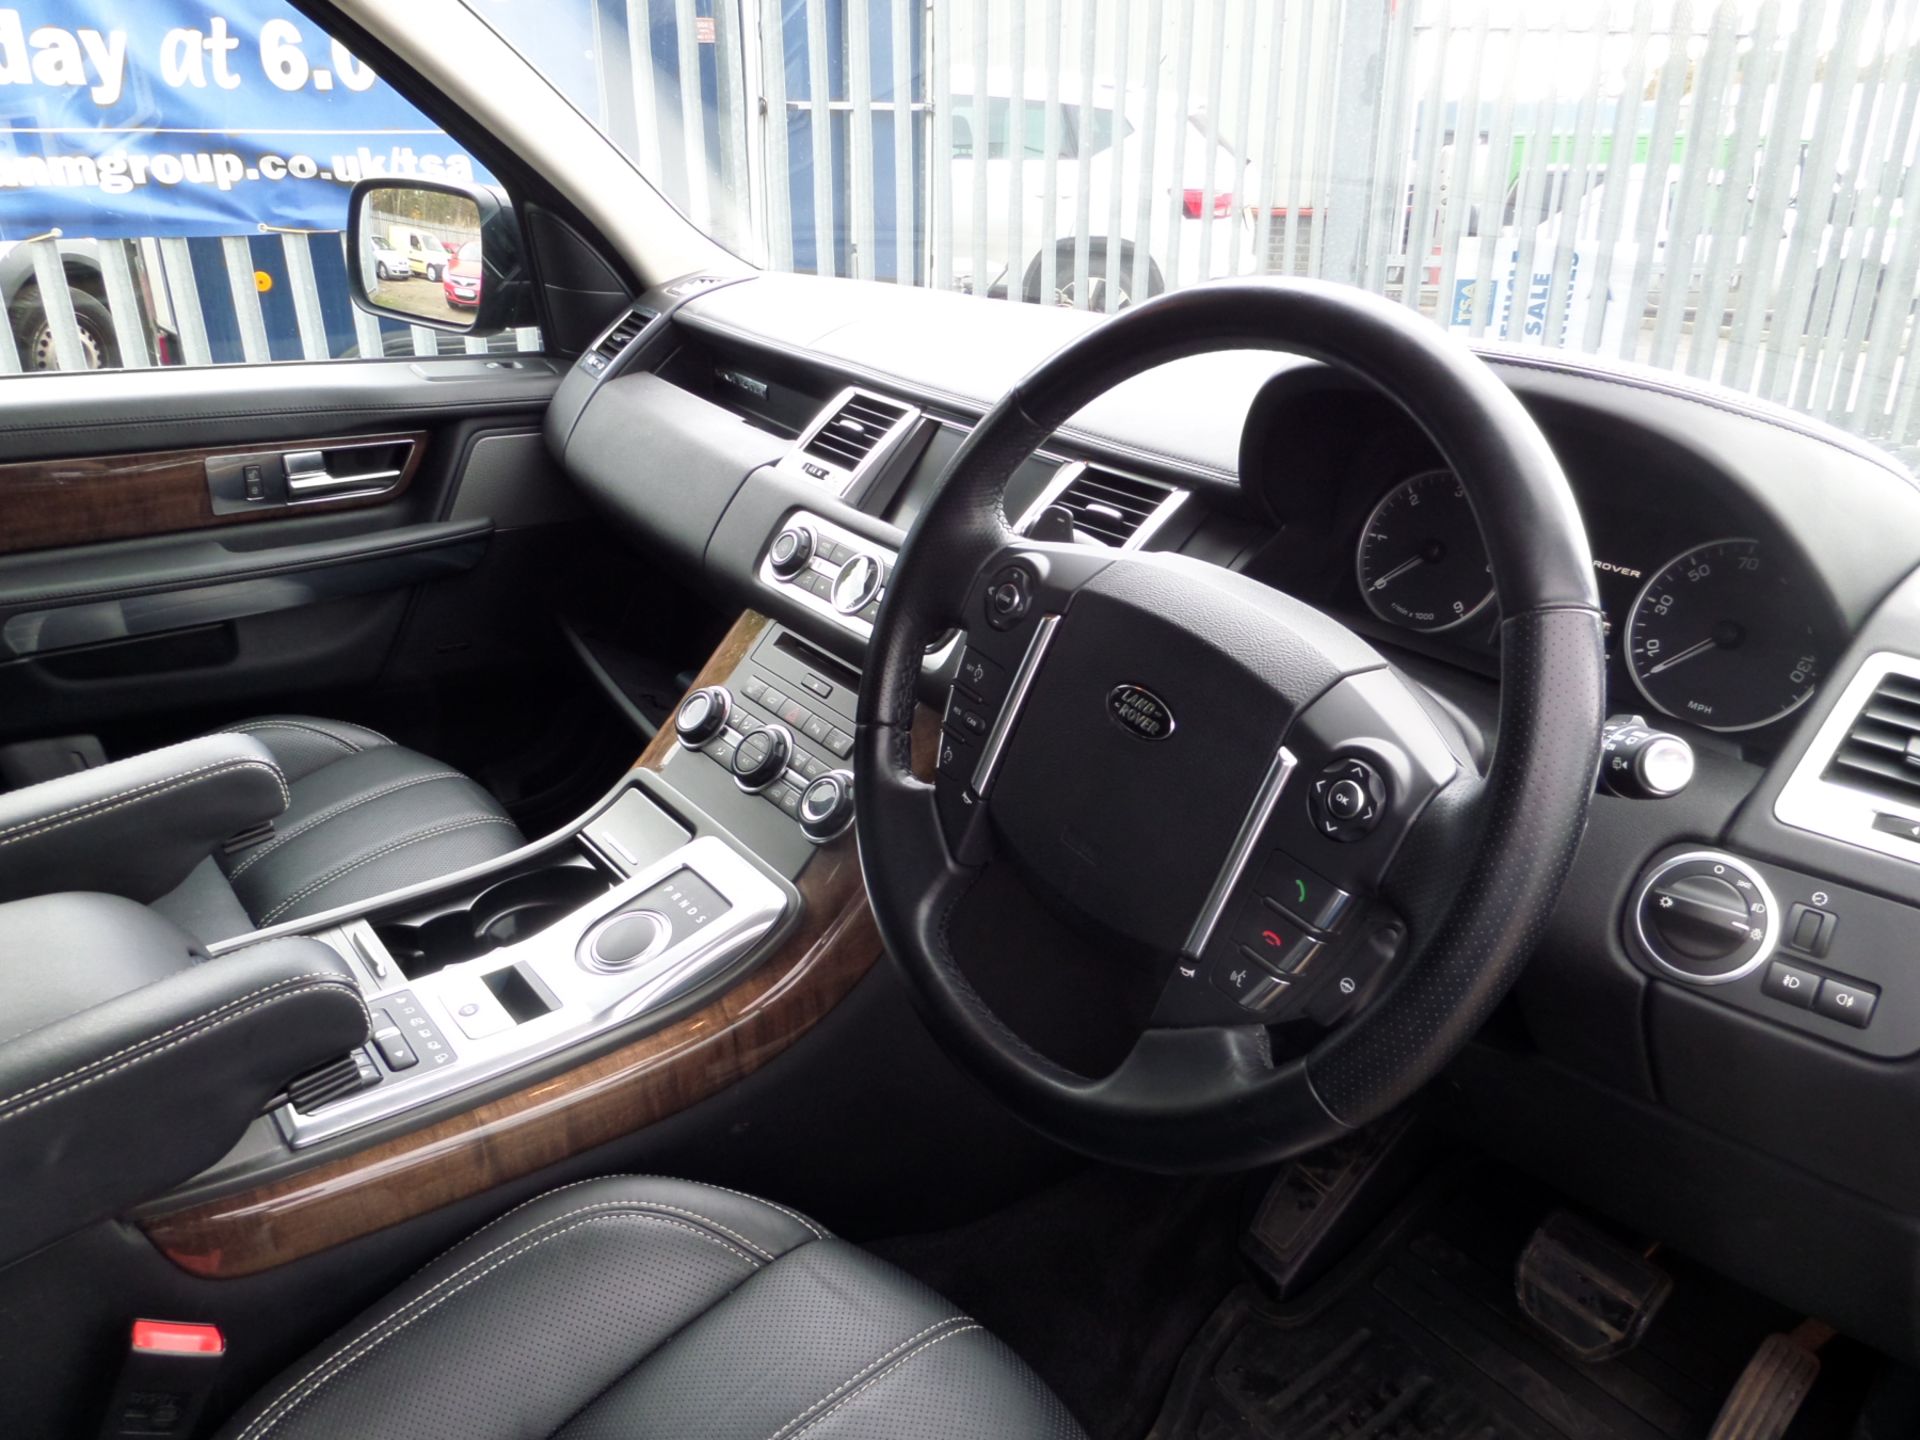 Land Rover R-rover Sport Hse Luxury - 2993cc Estate - Image 6 of 8